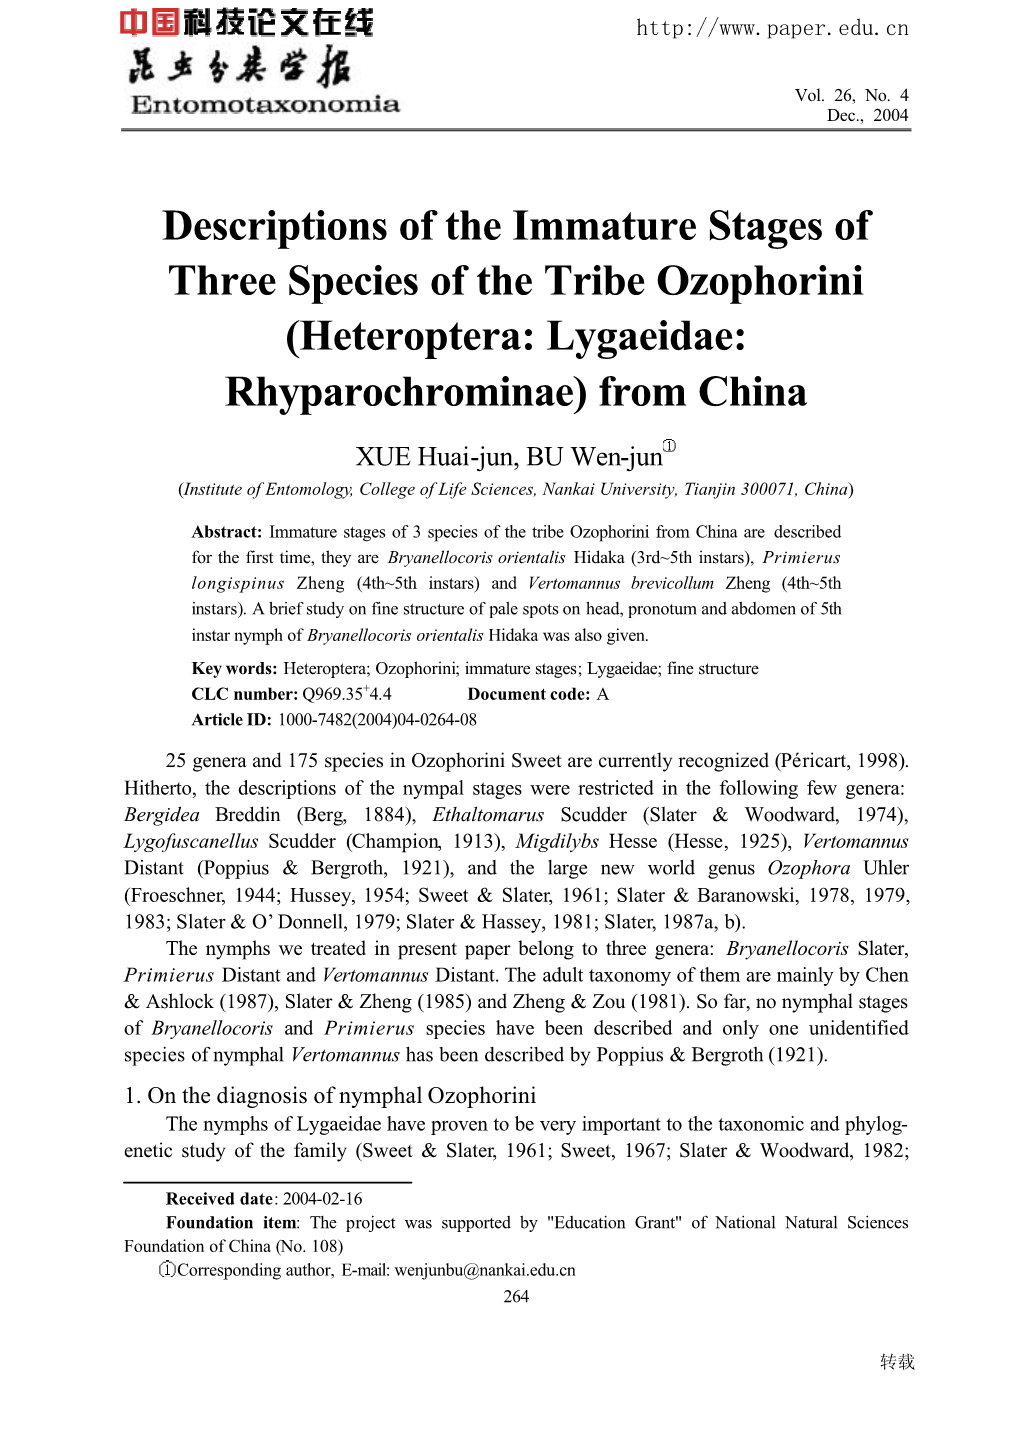 Descriptions of the Immature Stages of Three Species of the Tribe Ozophorini (Heteroptera: Lygaeidae: Rhyparochrominae) from China